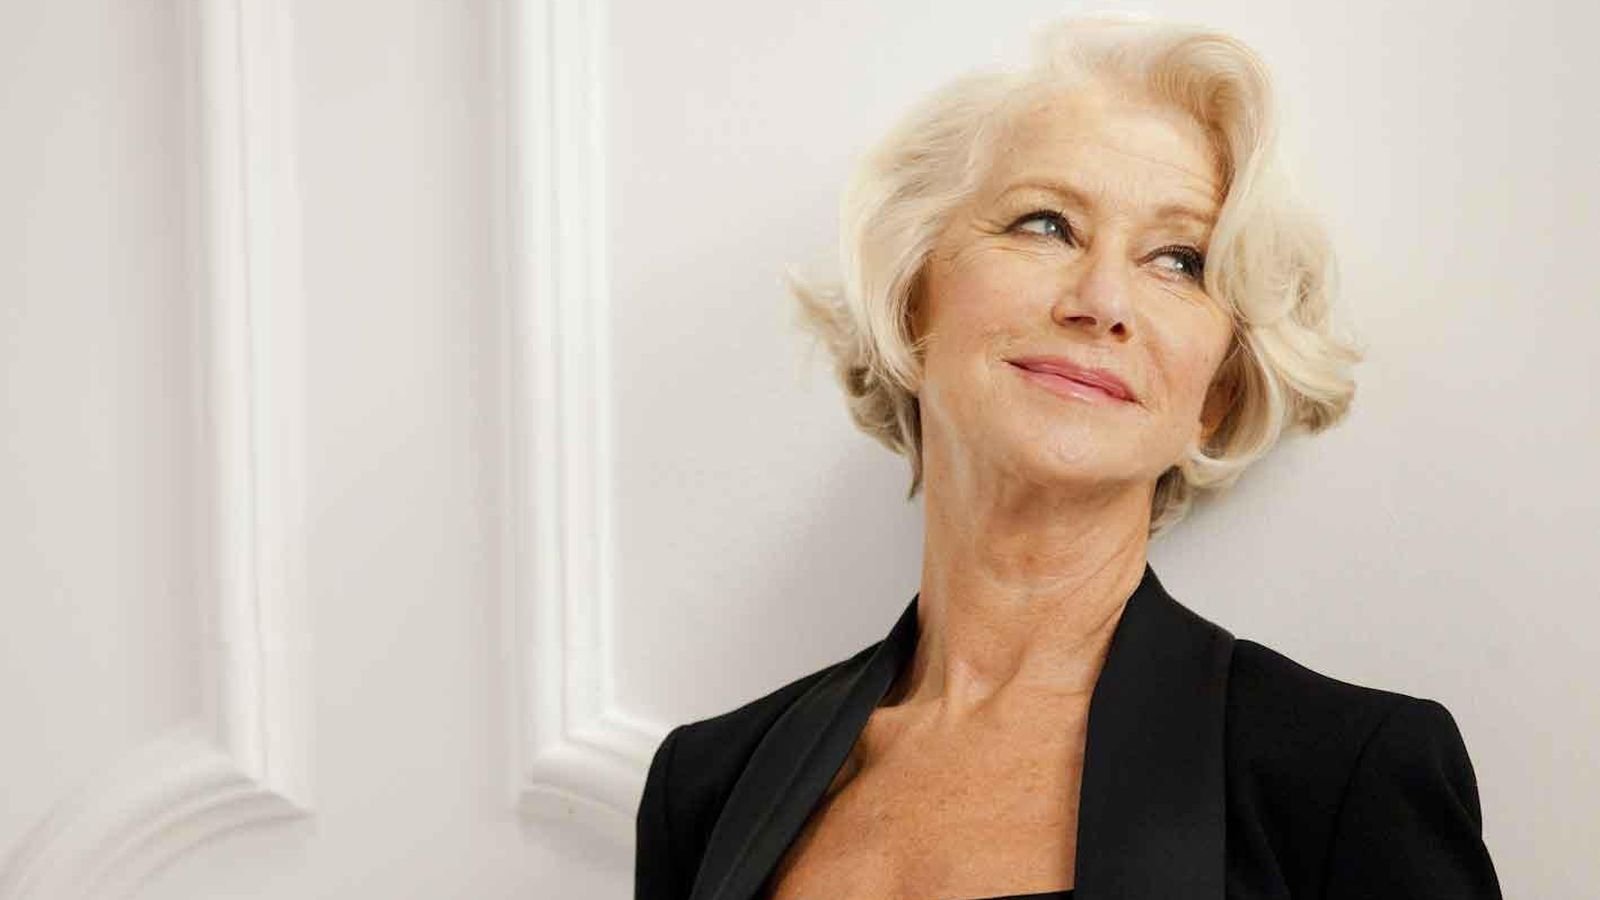 Star Wars: Damon Lindelof dismissed from Lucasfilm because he wanted Helen Mirren in the role of the elderly Rey?